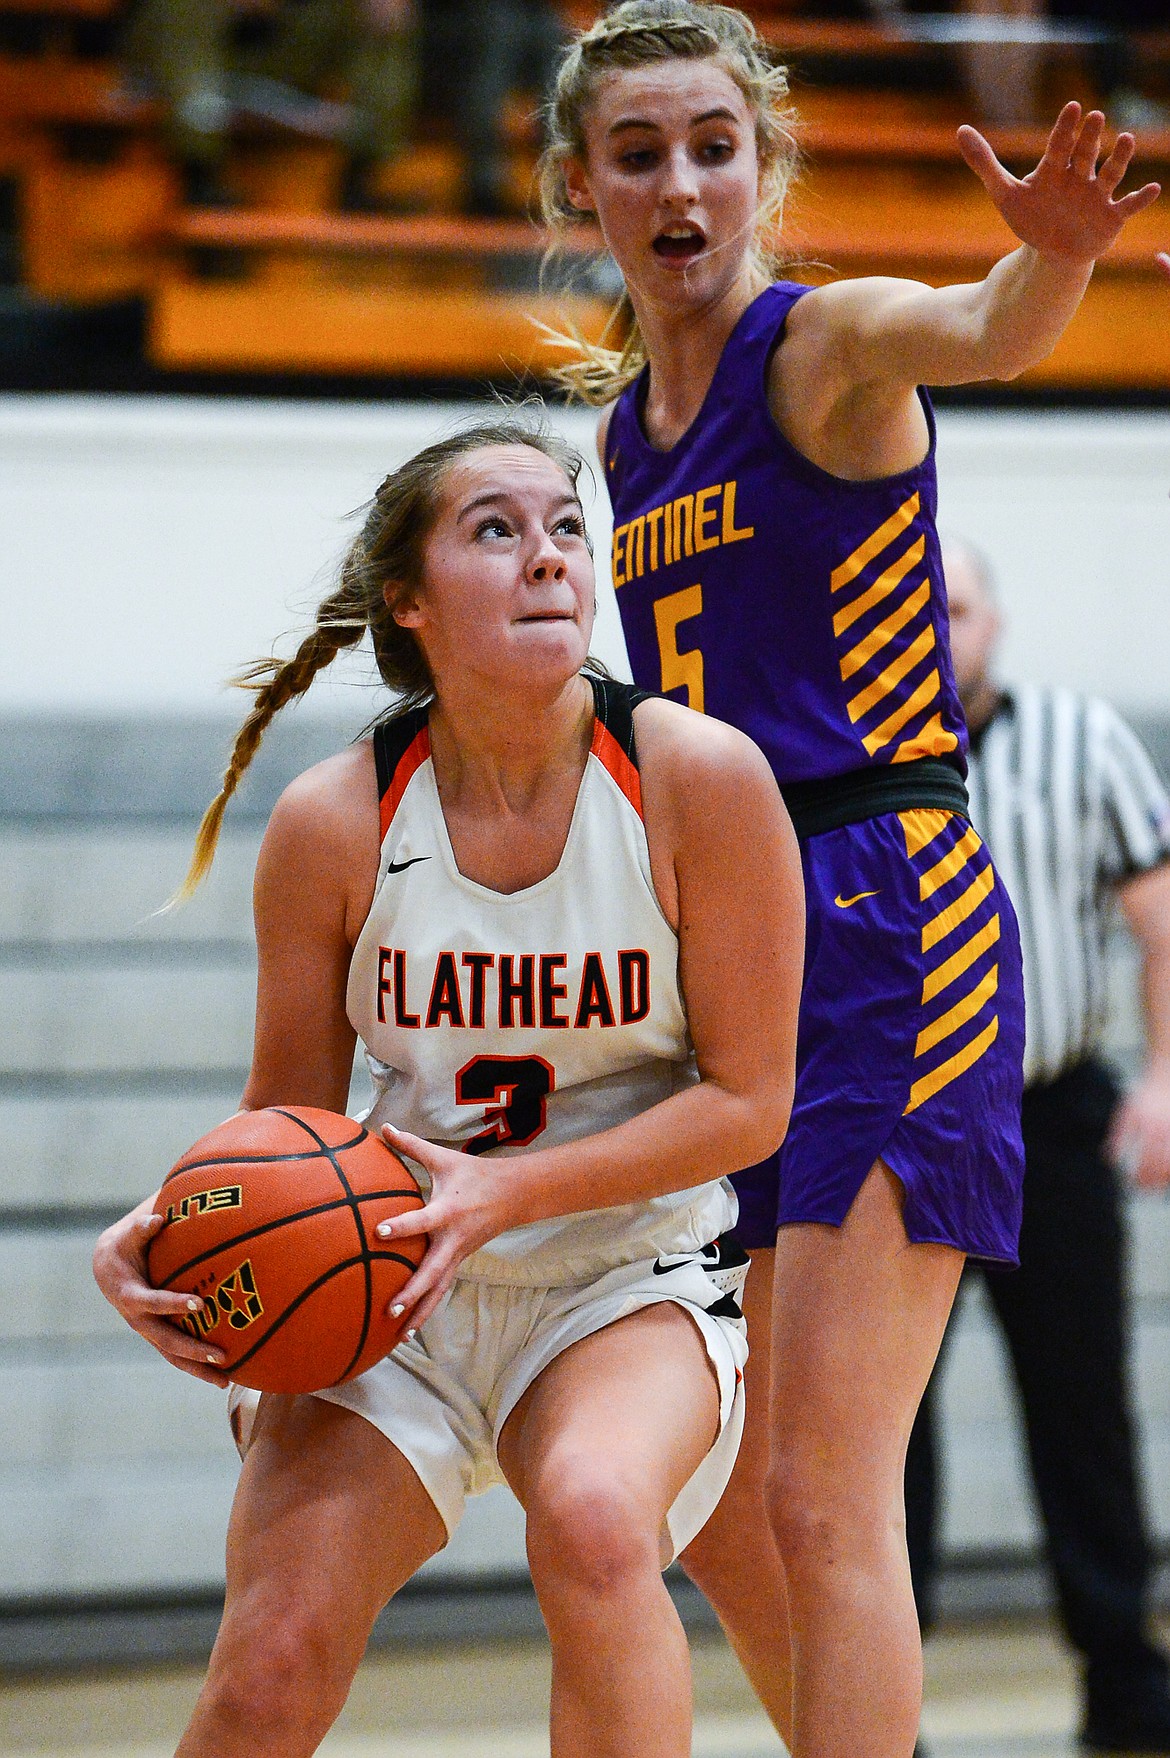 Flathead's Kuyra Seigel (3) goes to the basket against Missoula Sentinel's Brooke Stayner (5) in the first half at Flathead High School on Thursday. (Casey Kreider/Daily Inter Lake)